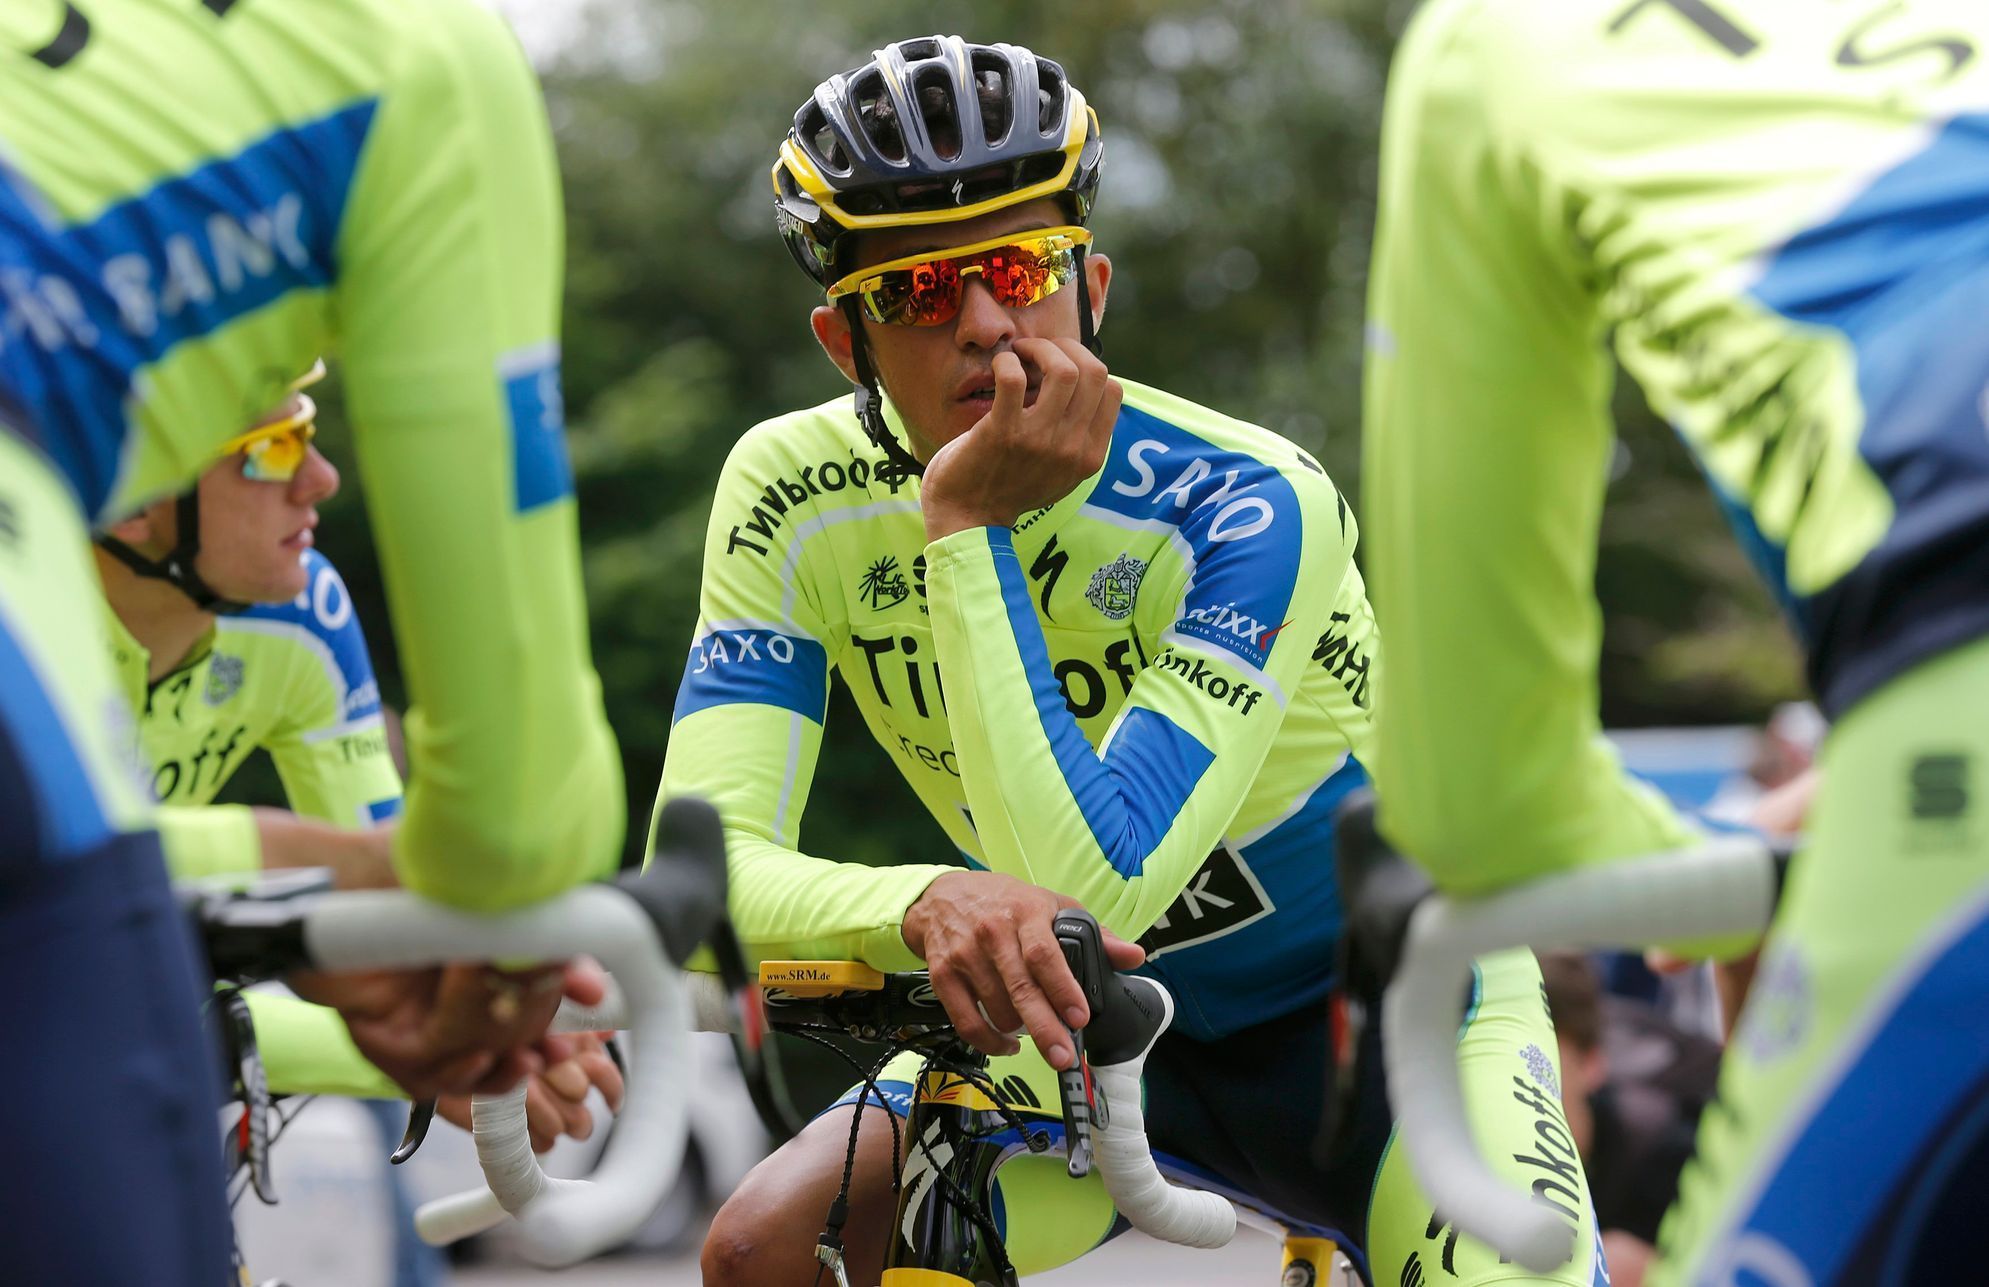 Tinkoff-Saxo team rider Contador of Spain is seen before a training session for the Tour de France cycling race near Leeds